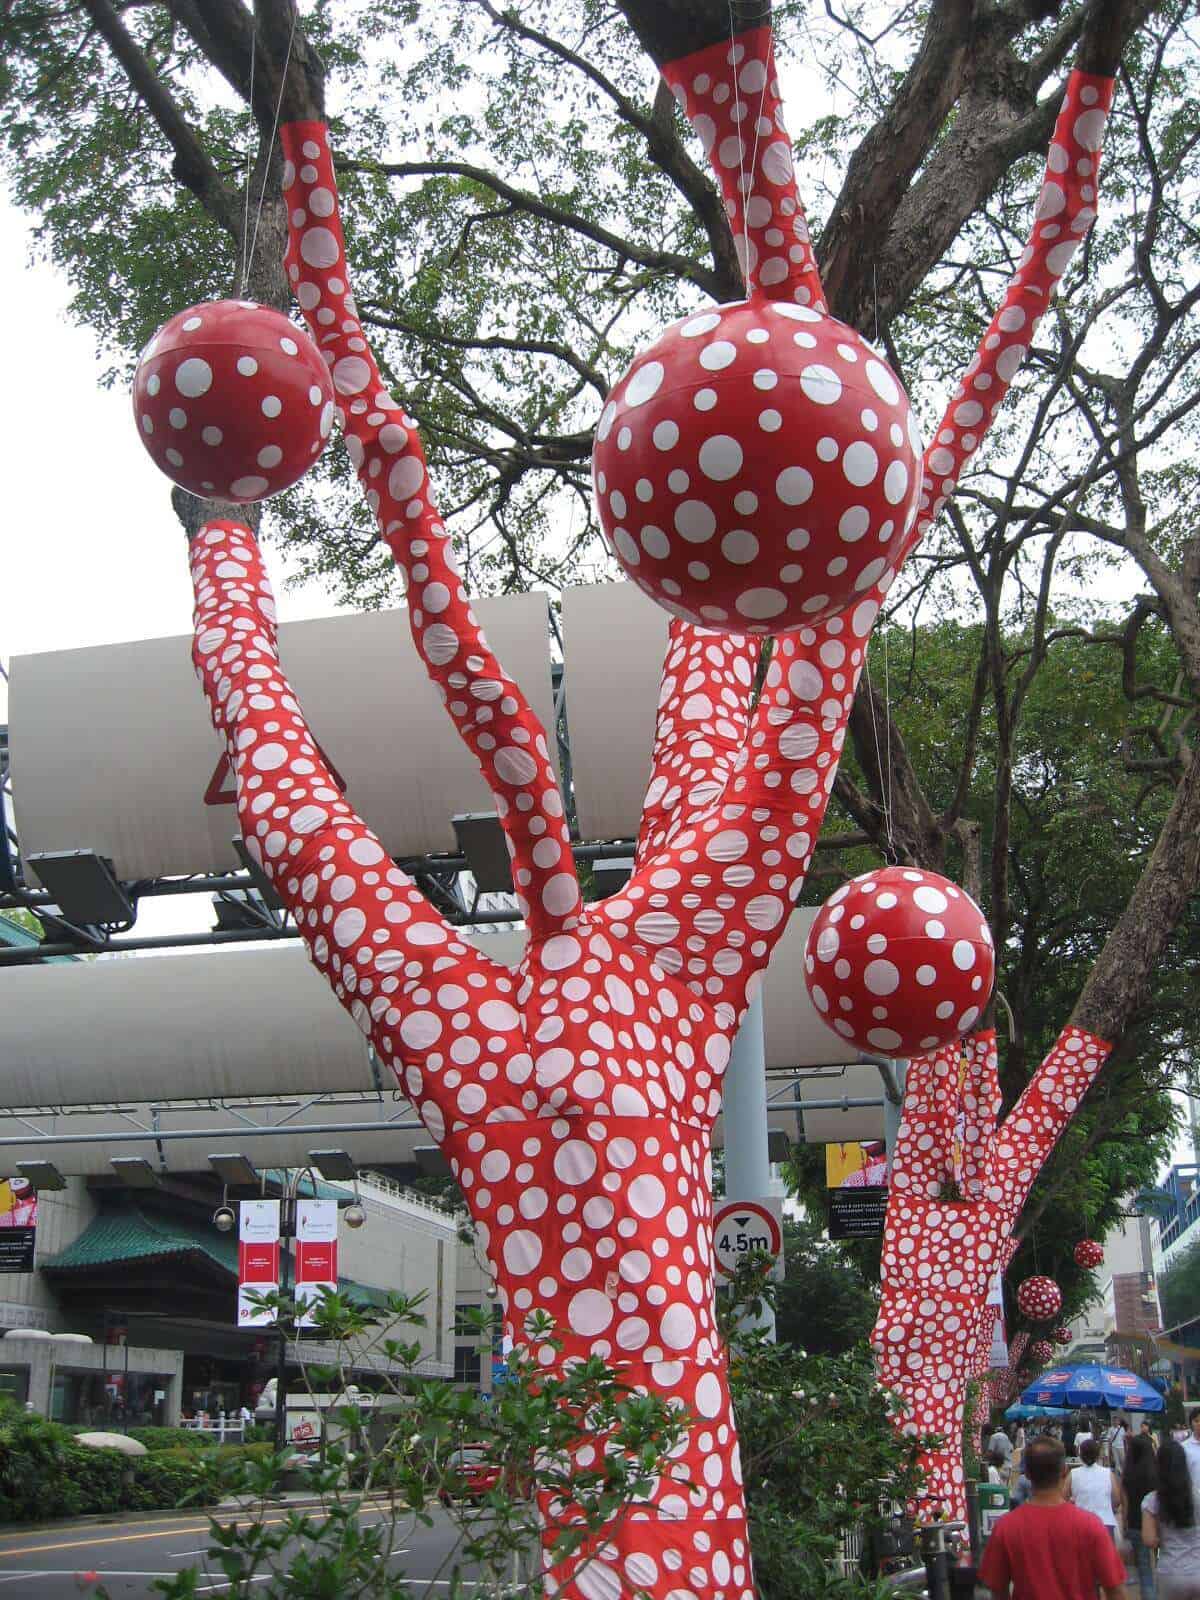 Yayoi Kusama - Ascension of Polkadots on the Trees at the Singapore Biennale 2006